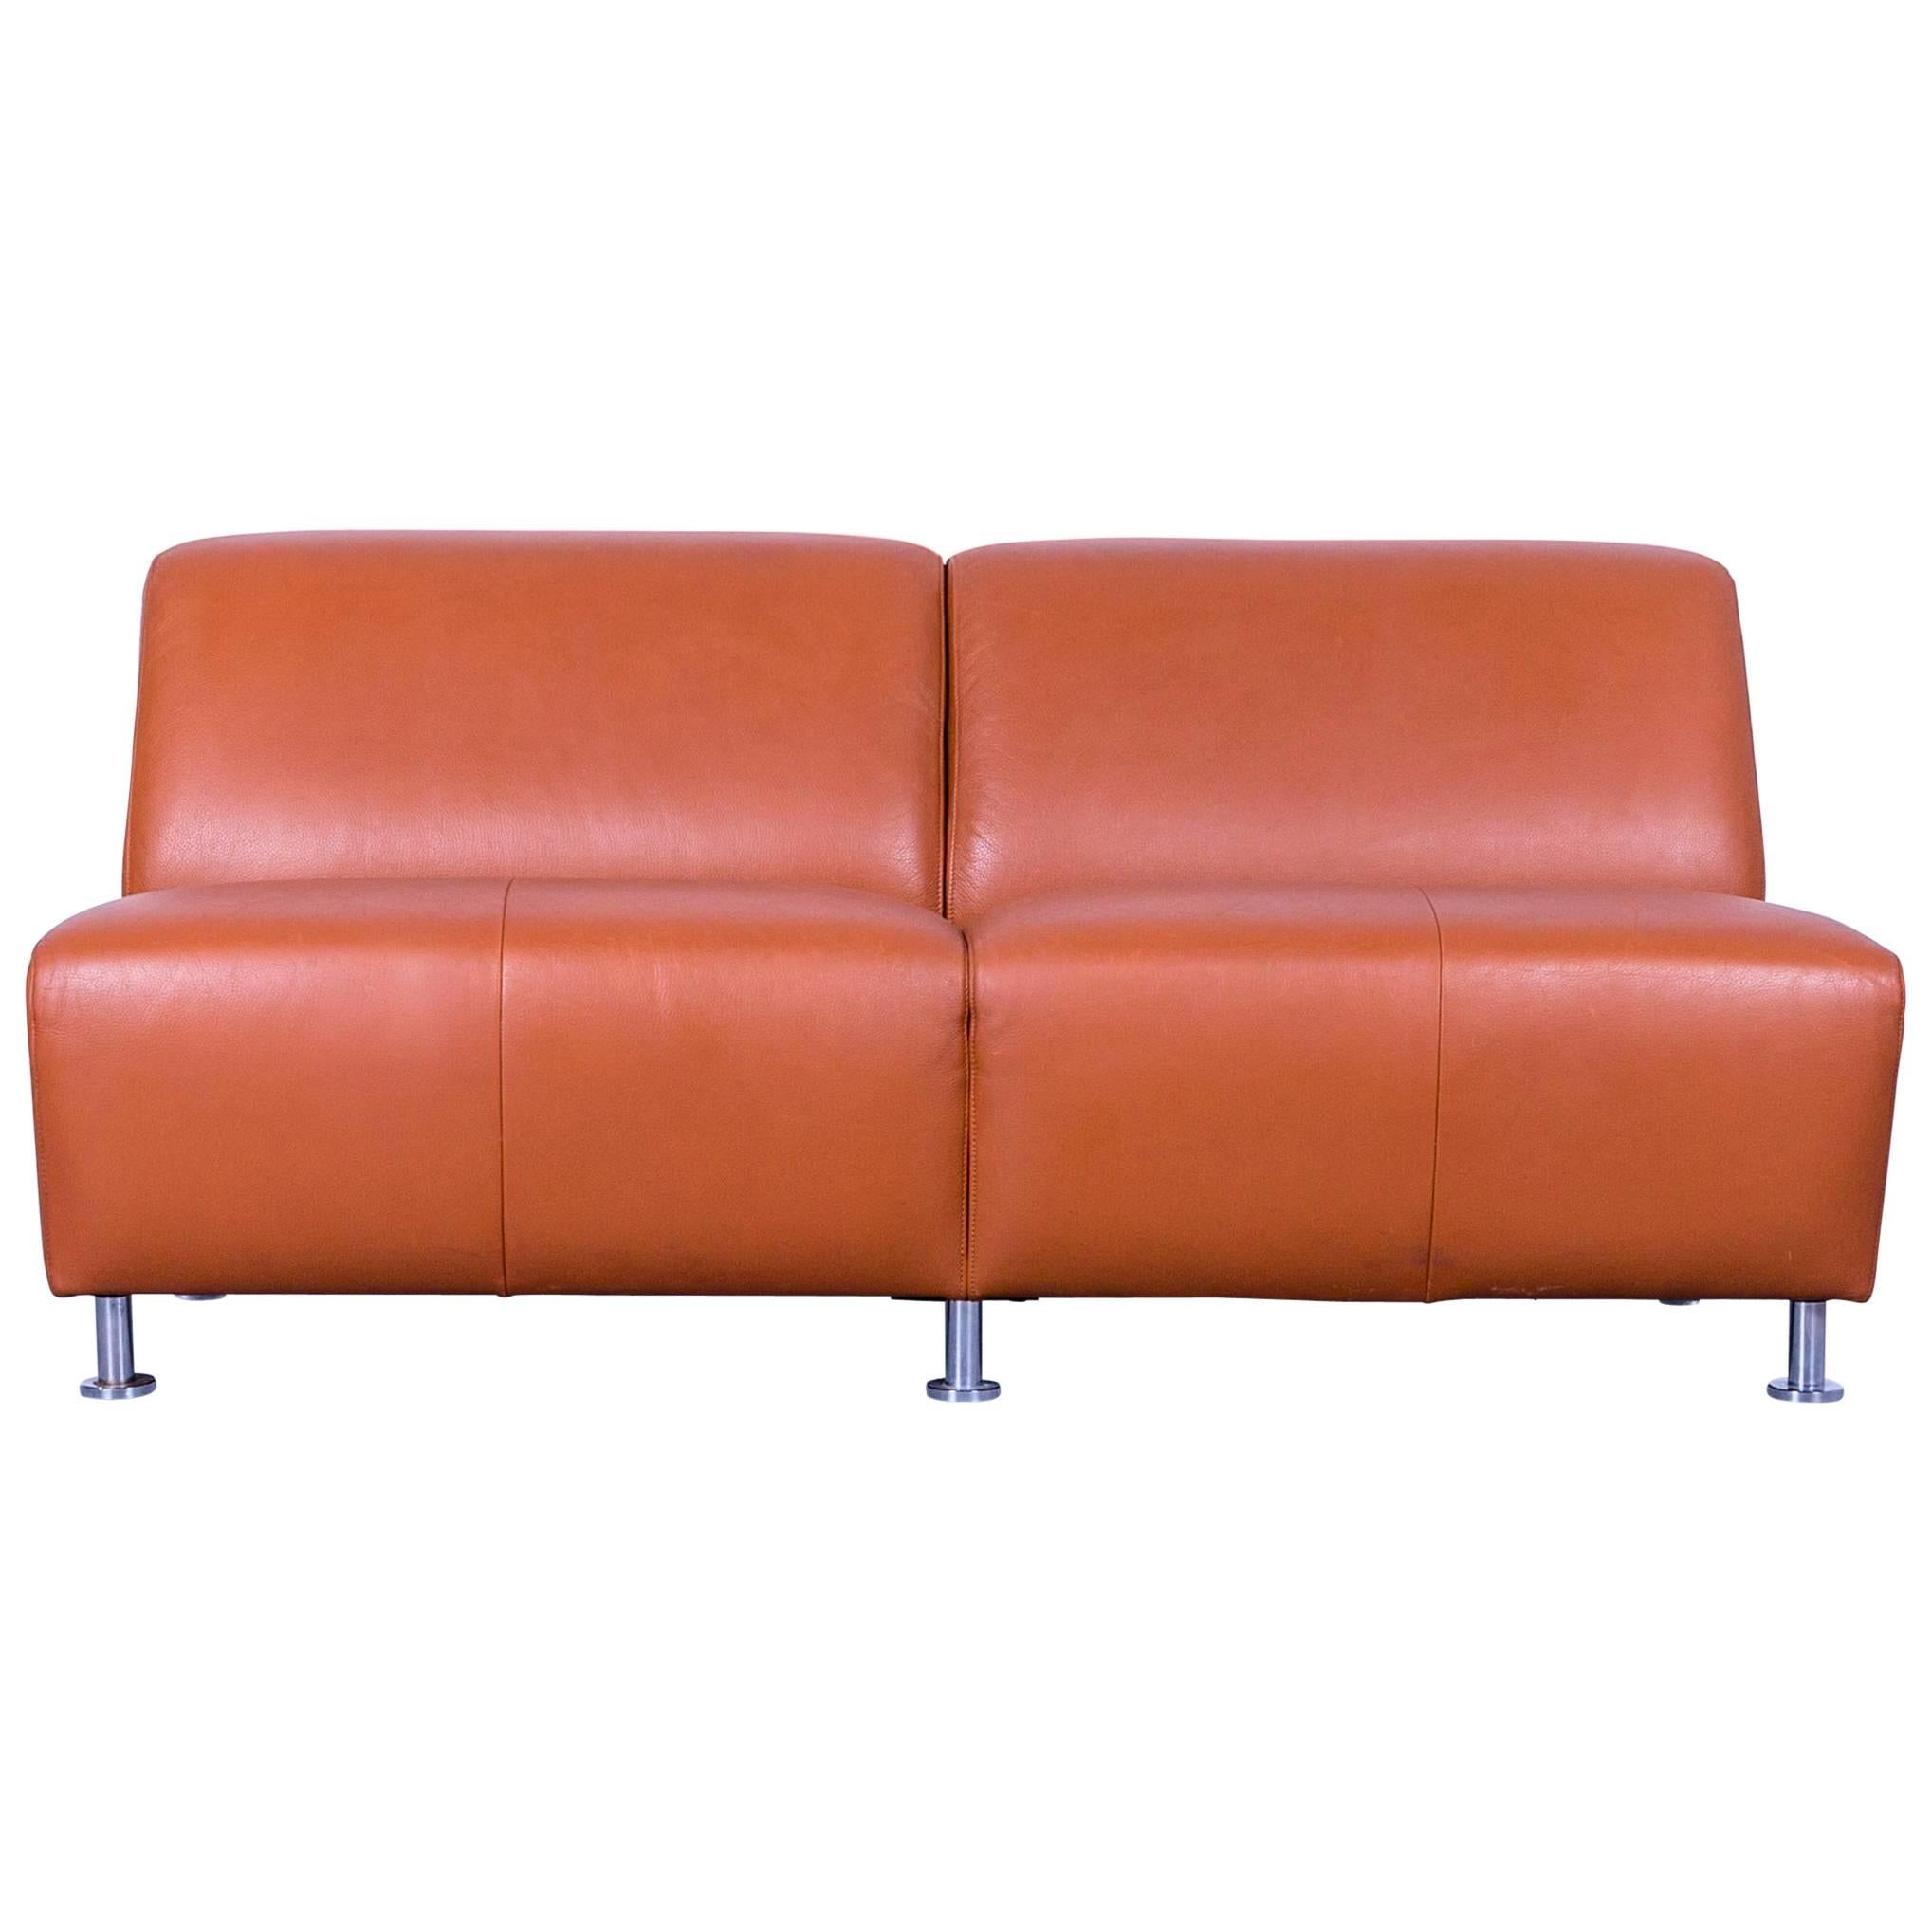 De Sede Leather Sofa Brown Two-Seat Couch